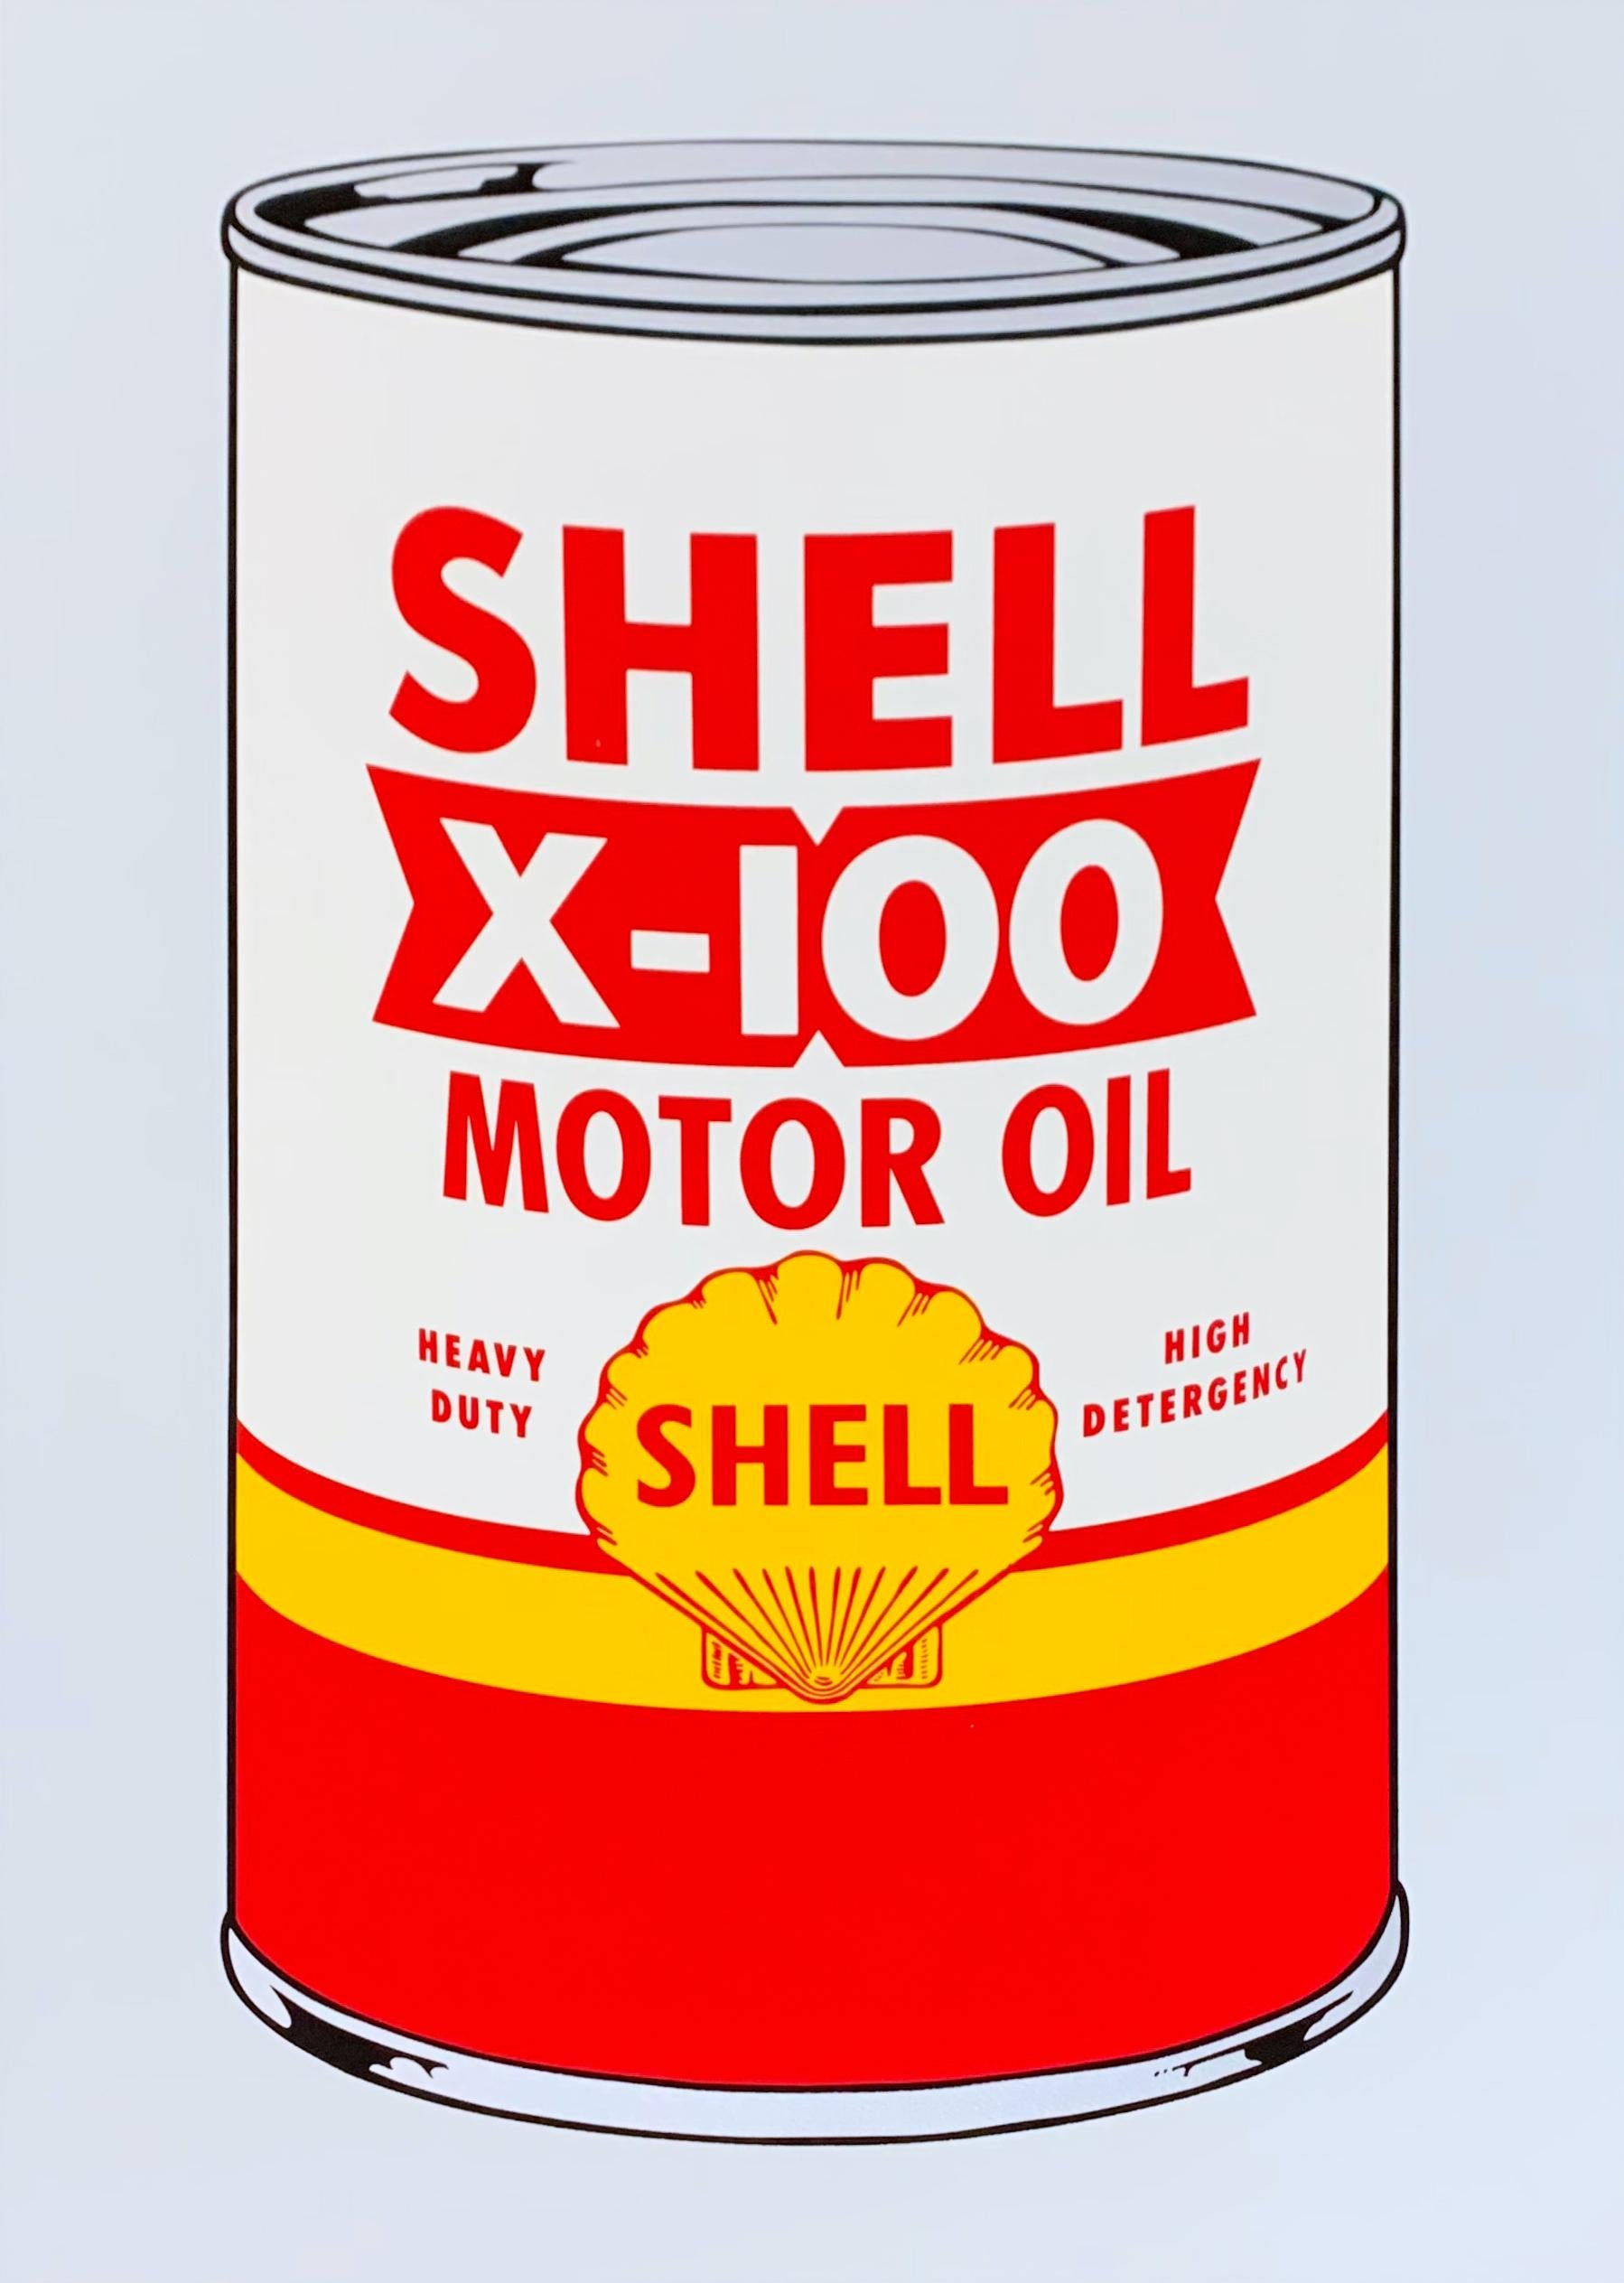 Masterpieces in Oils: Shell - Contemporary Print by Heiner Meyer